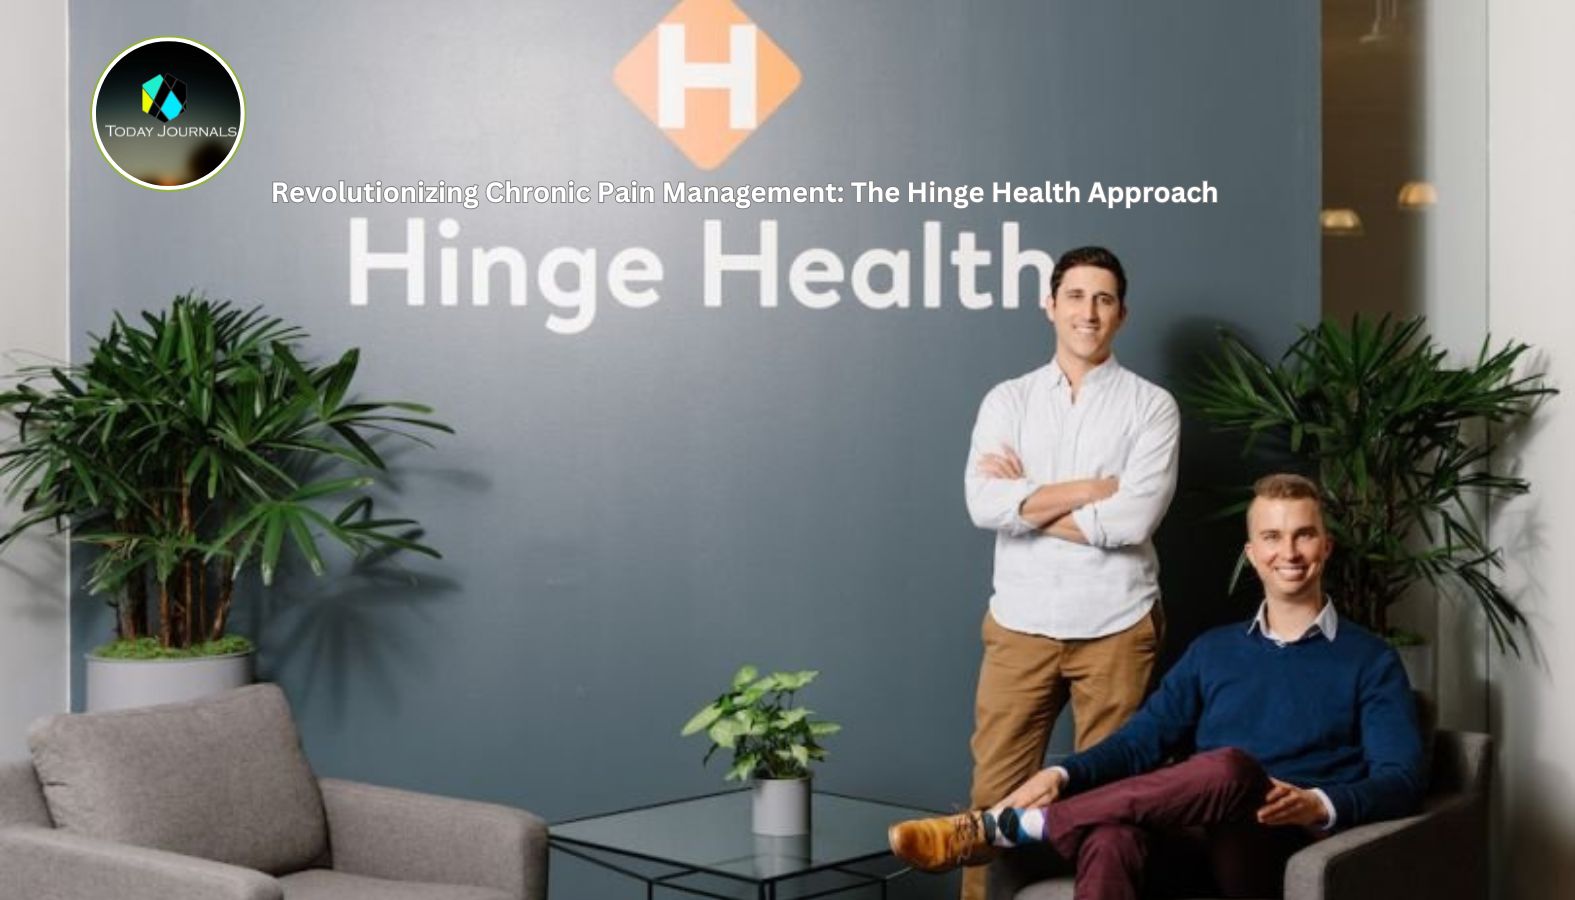  Revolutionizing Chronic Pain Management: The Hinge Health Approach - Today Journals